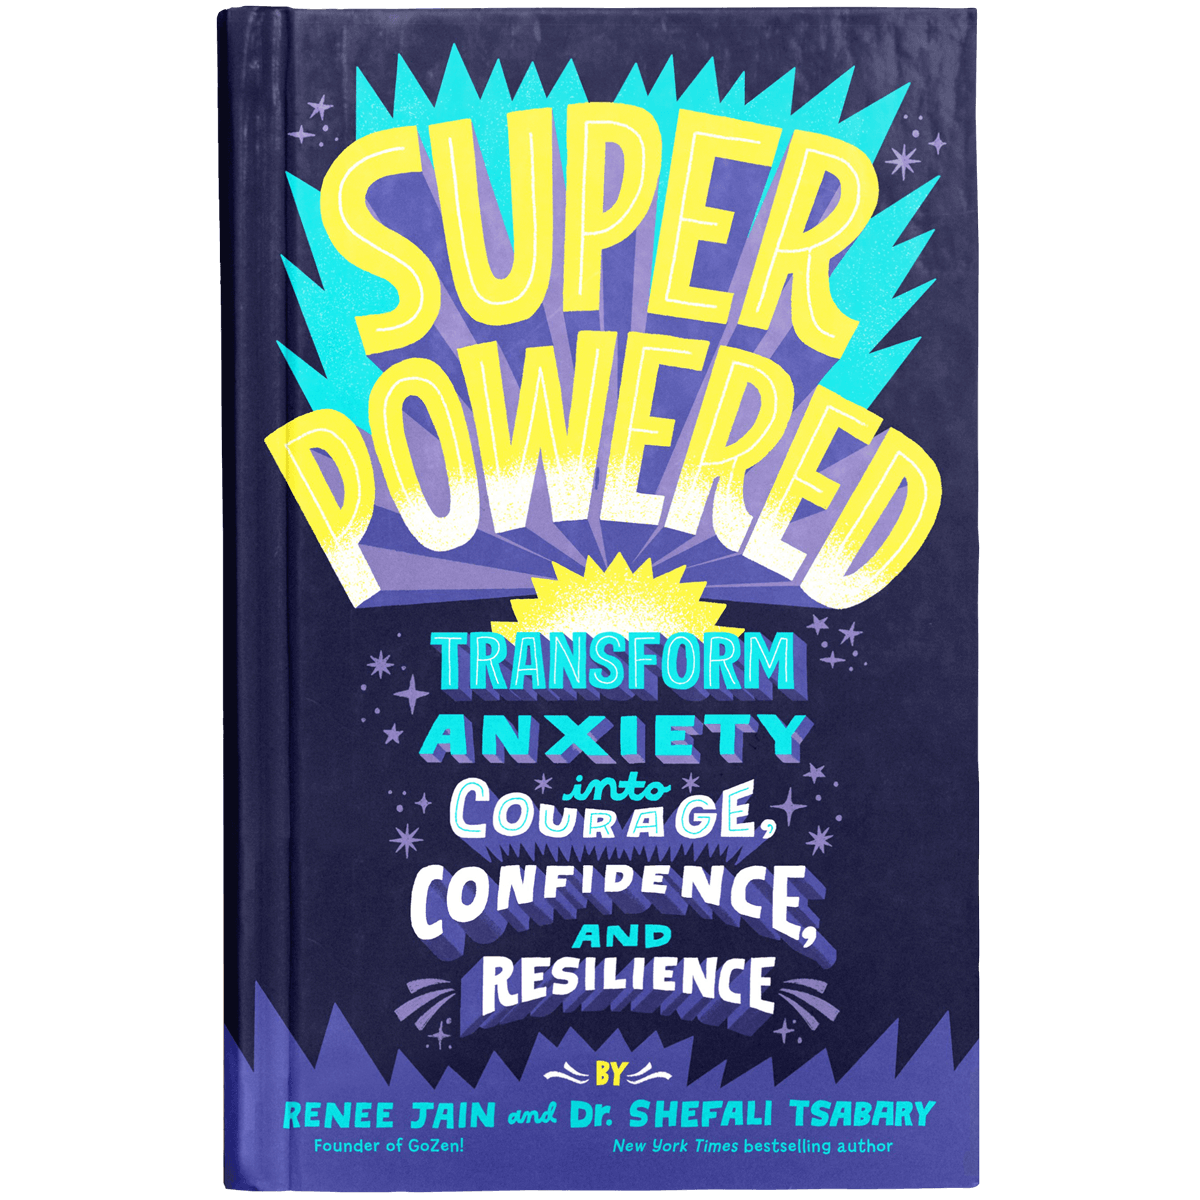 Hey There! What's Your Superpower?: A book to encourage a growth mindset of  resilience, persistence, self-confidence, self-reliance and self-esteem